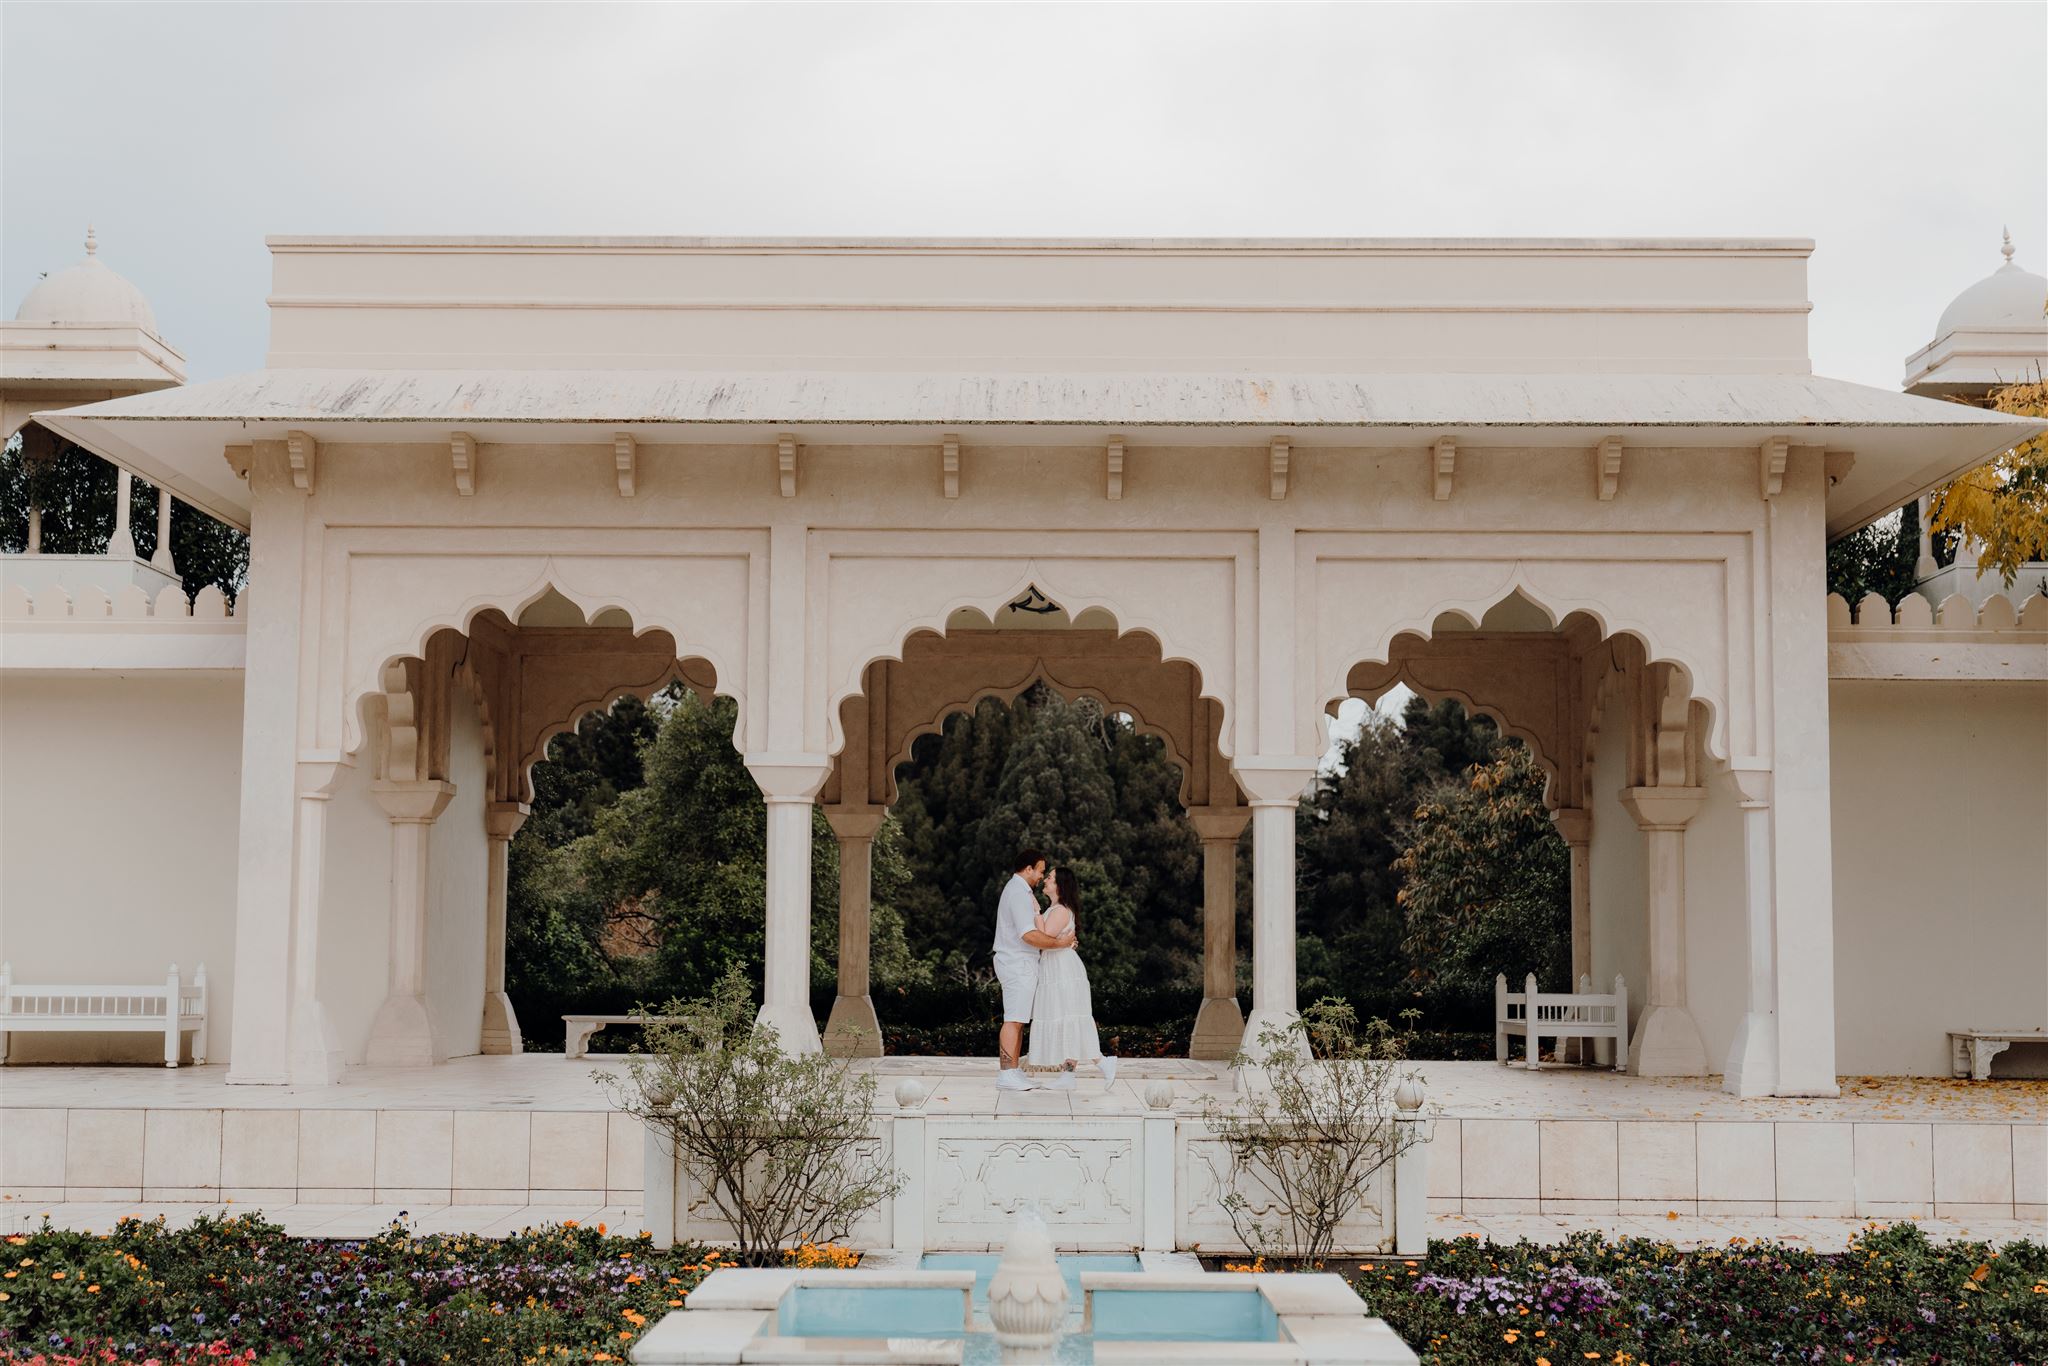 A couple wearing white holding one another in the Indian Garden in the Hamilton enclosed gardens during a pre-wedding engagement photoshoot with photographer Haley Adele Photography